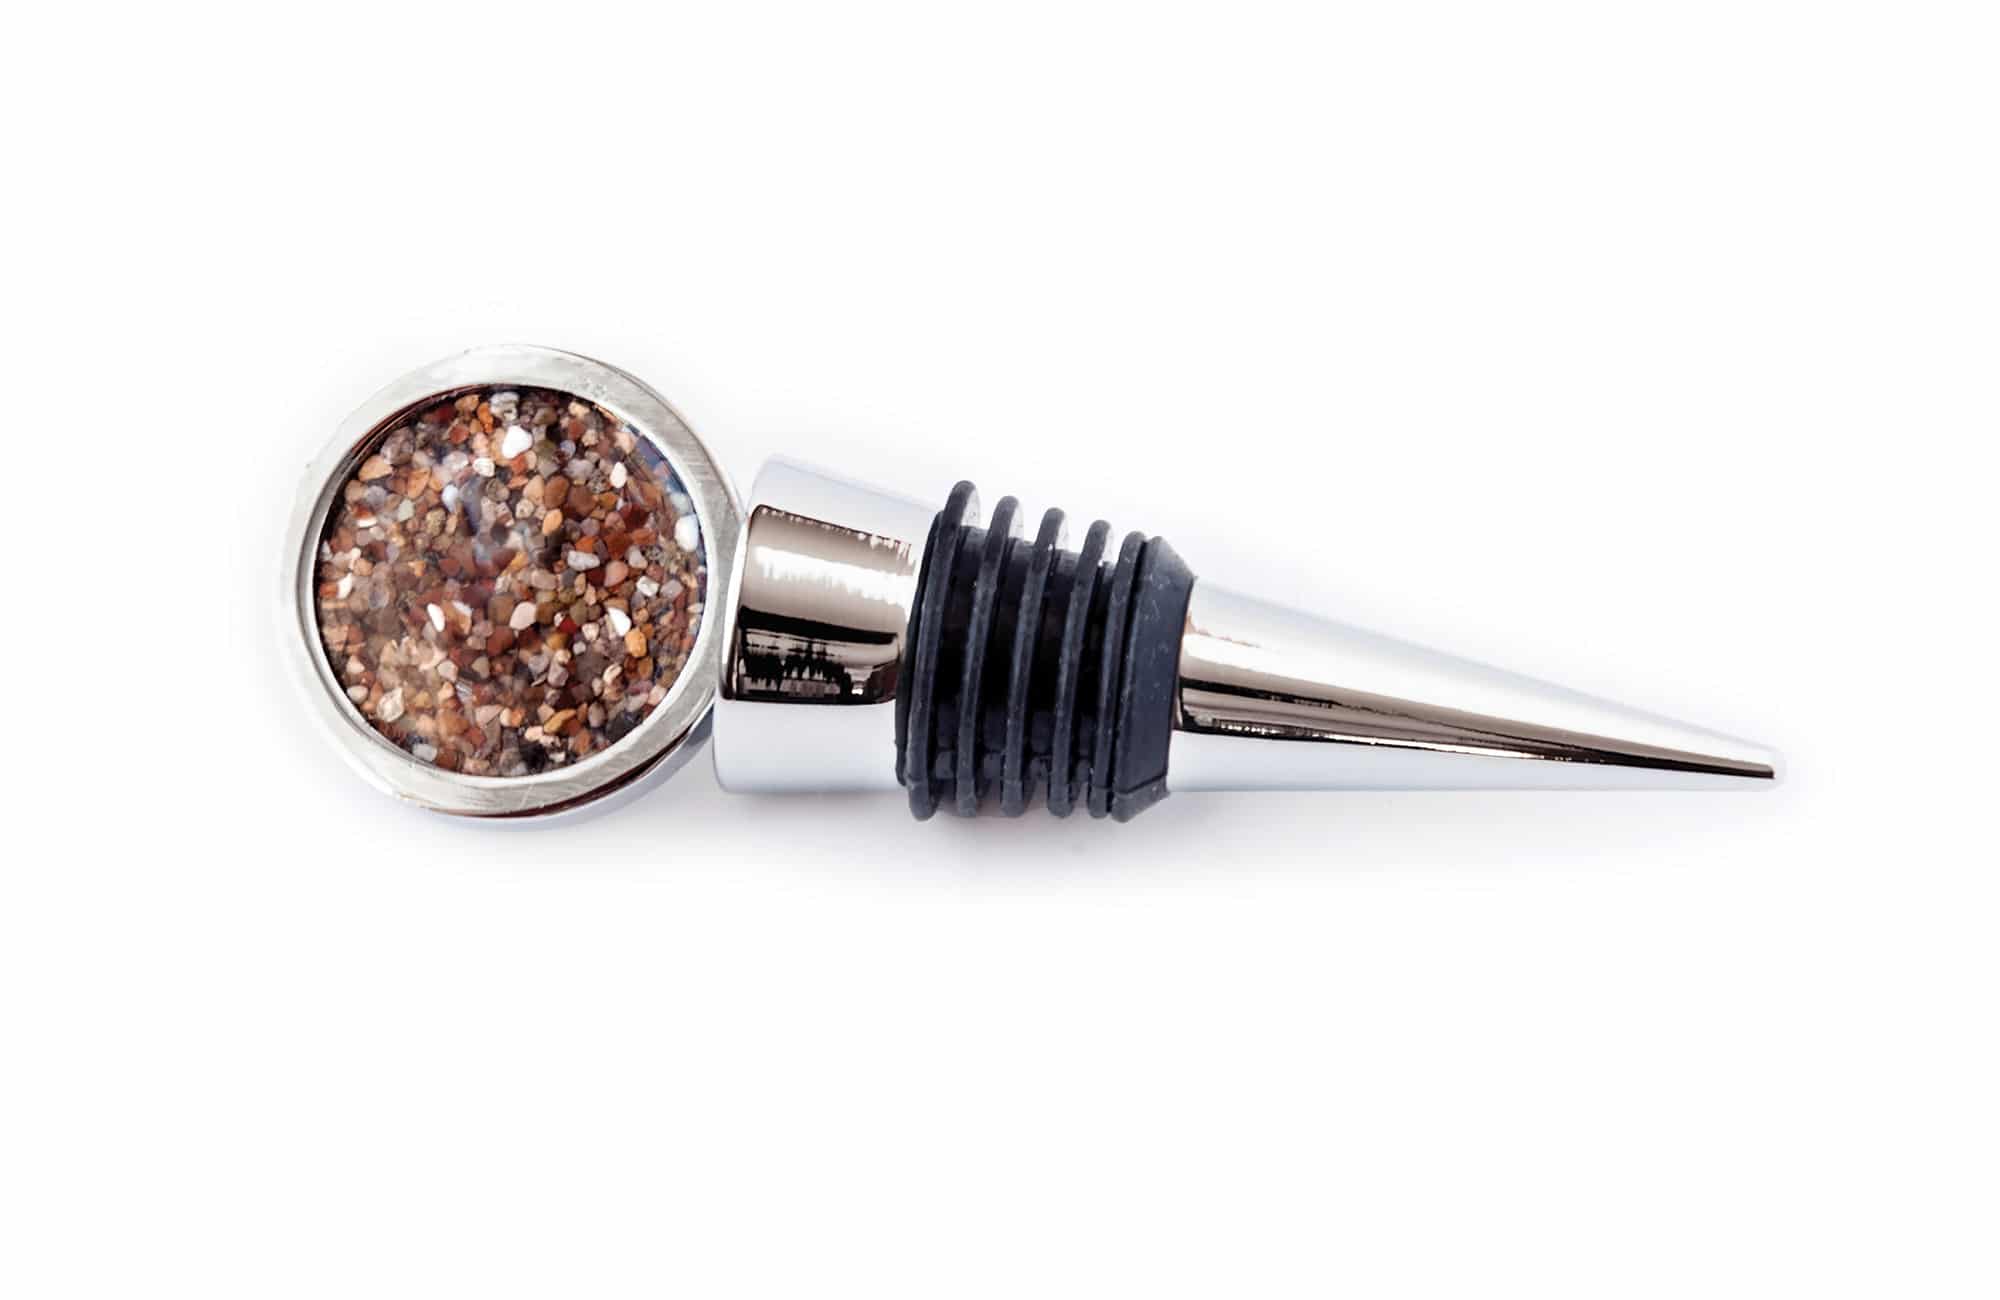 Travel Gifts for Travelers: Wine stopper